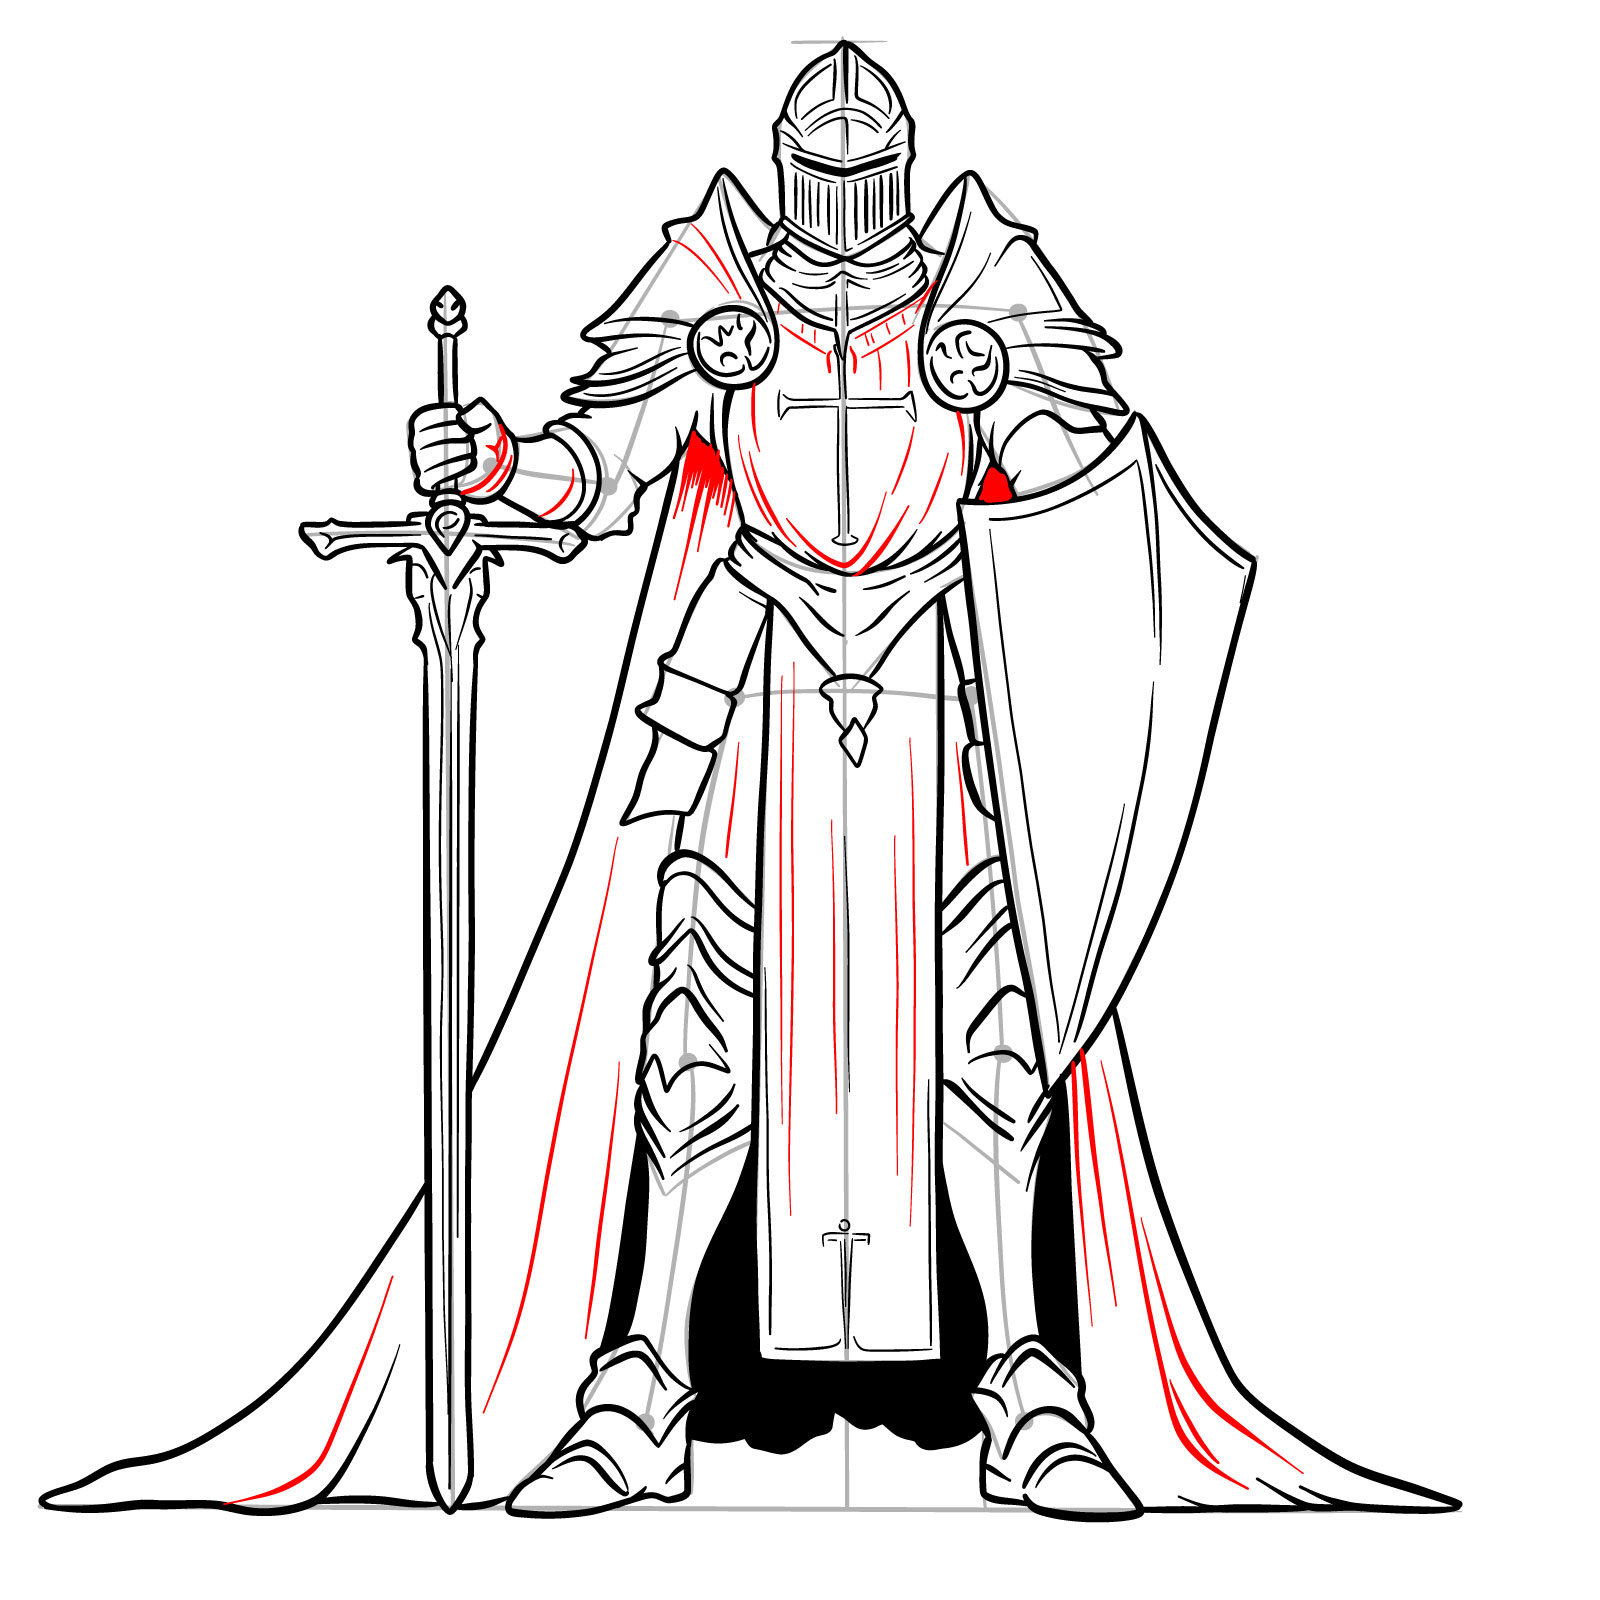 How to draw a male paladin in helmet step 22: adding fabric folds and shading